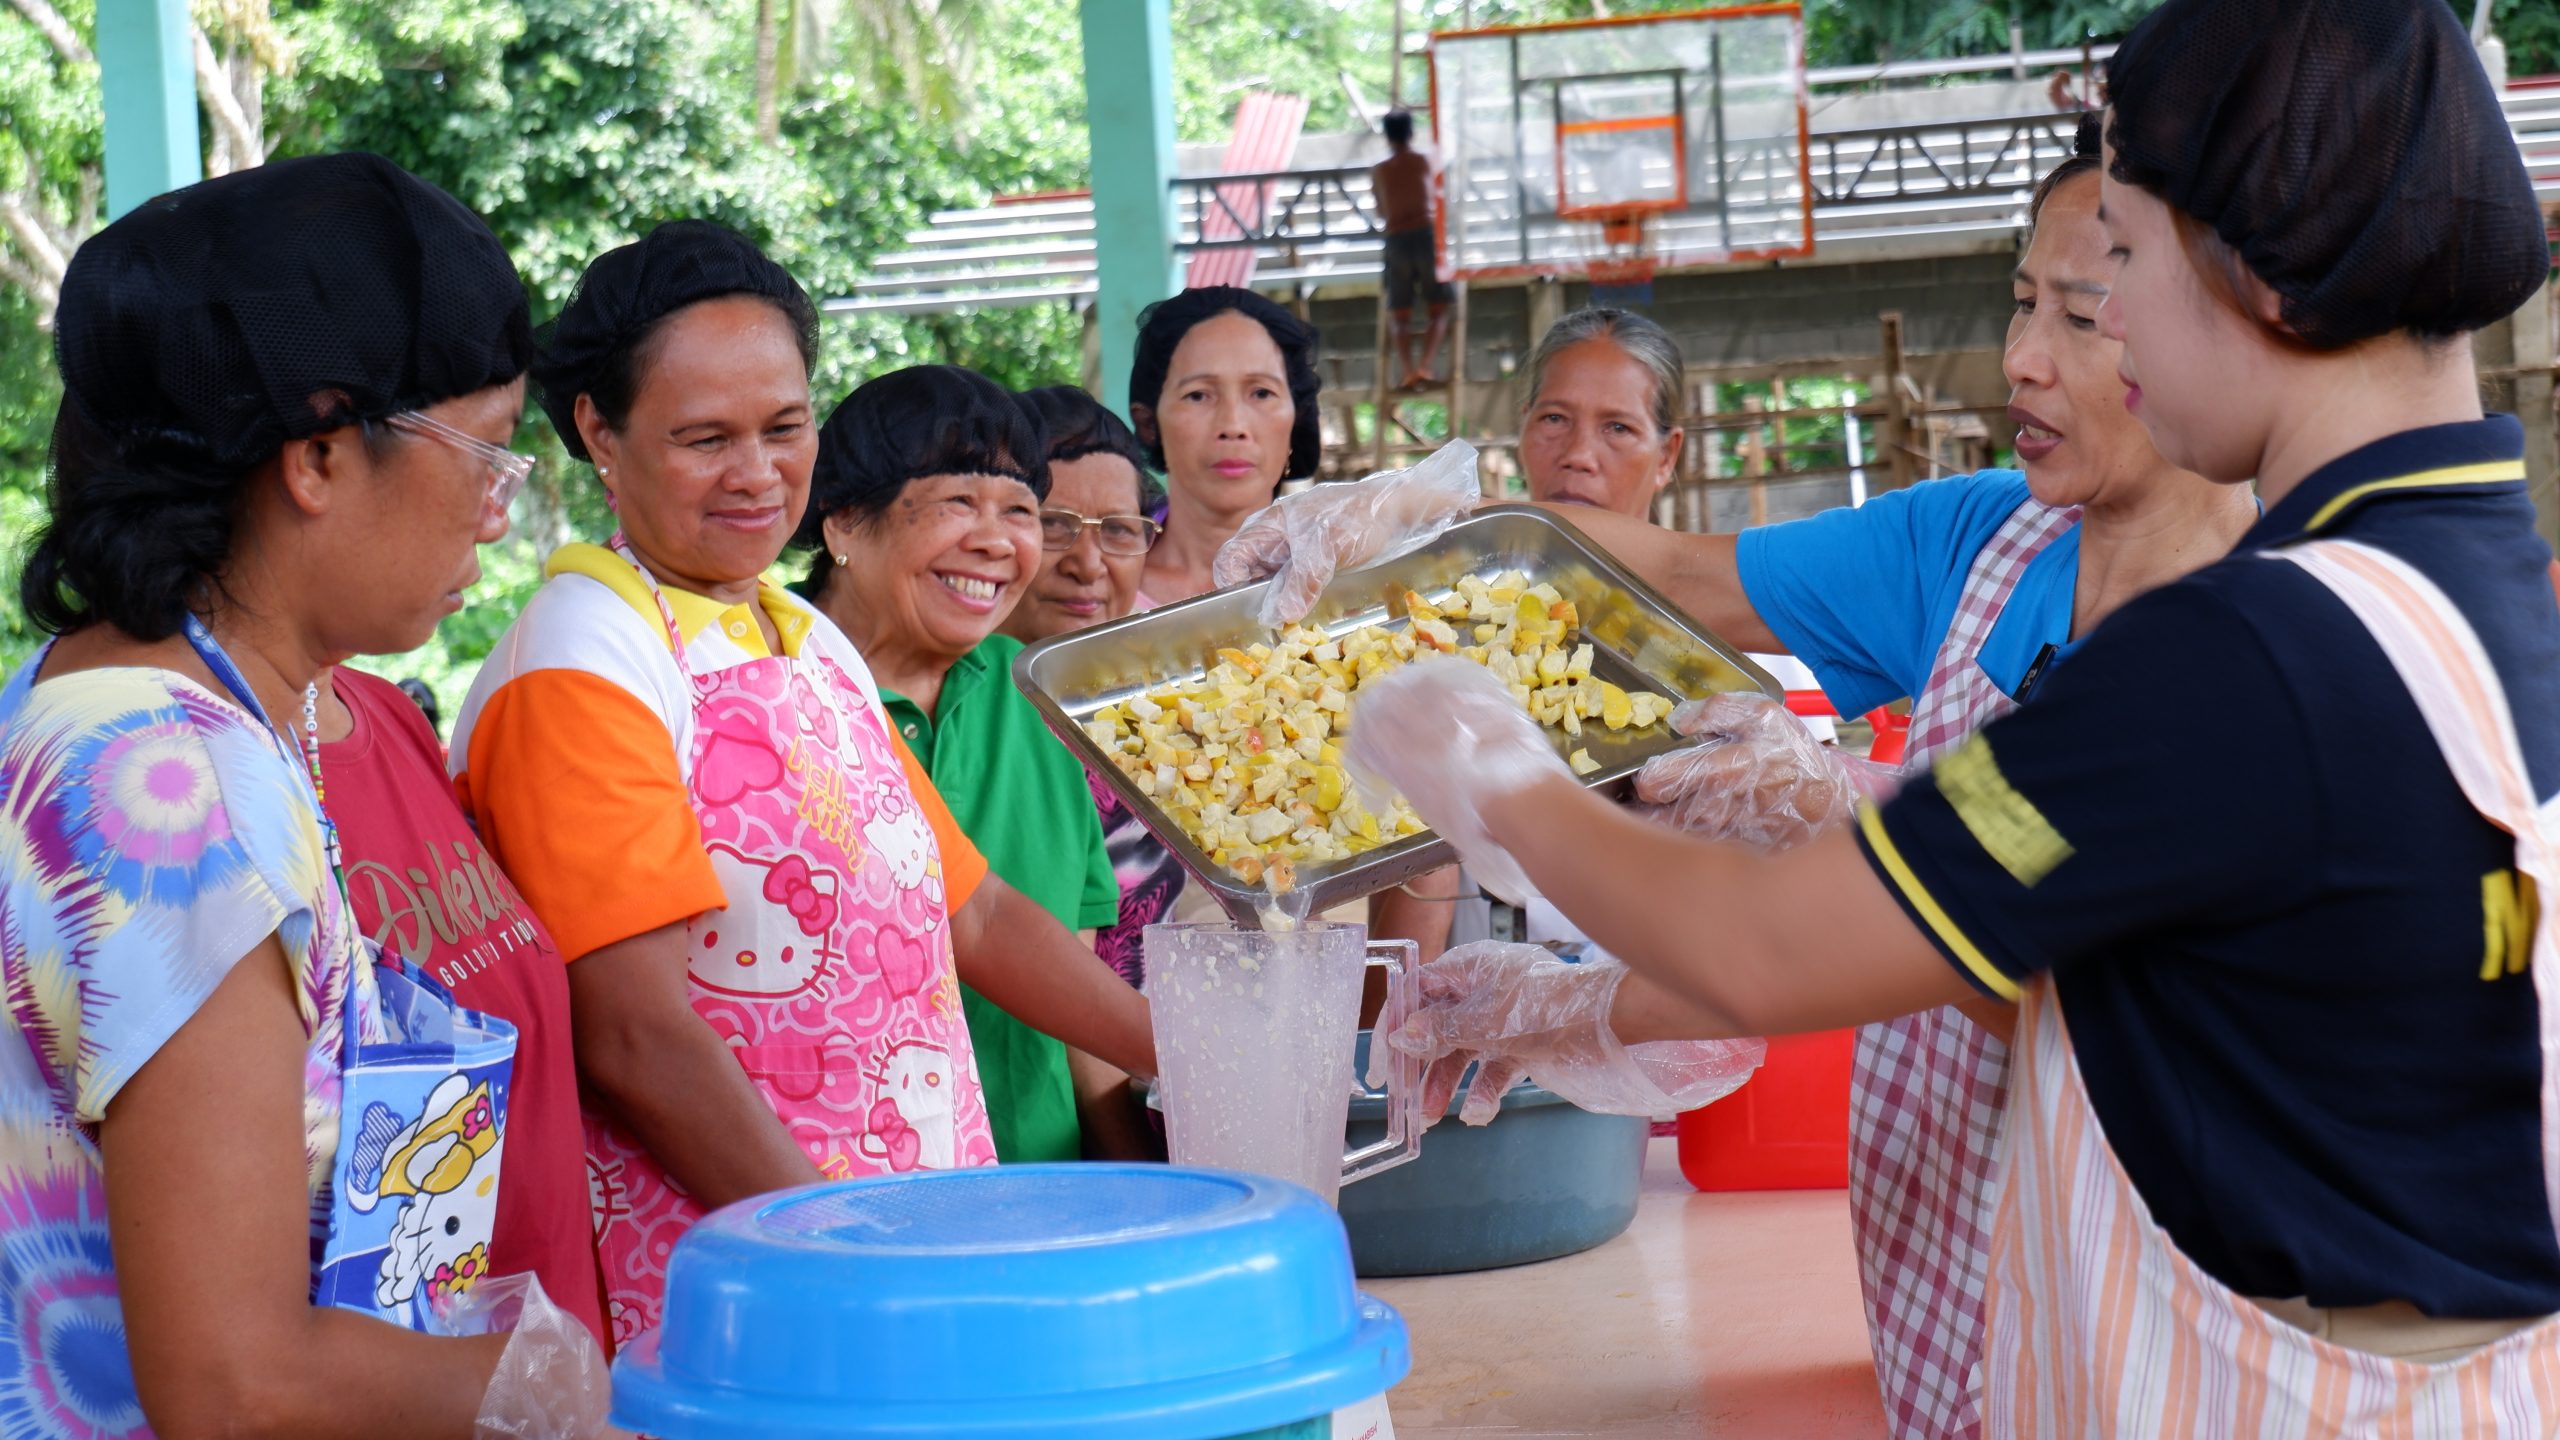 270 Palawan farmers receive specialized training on project management